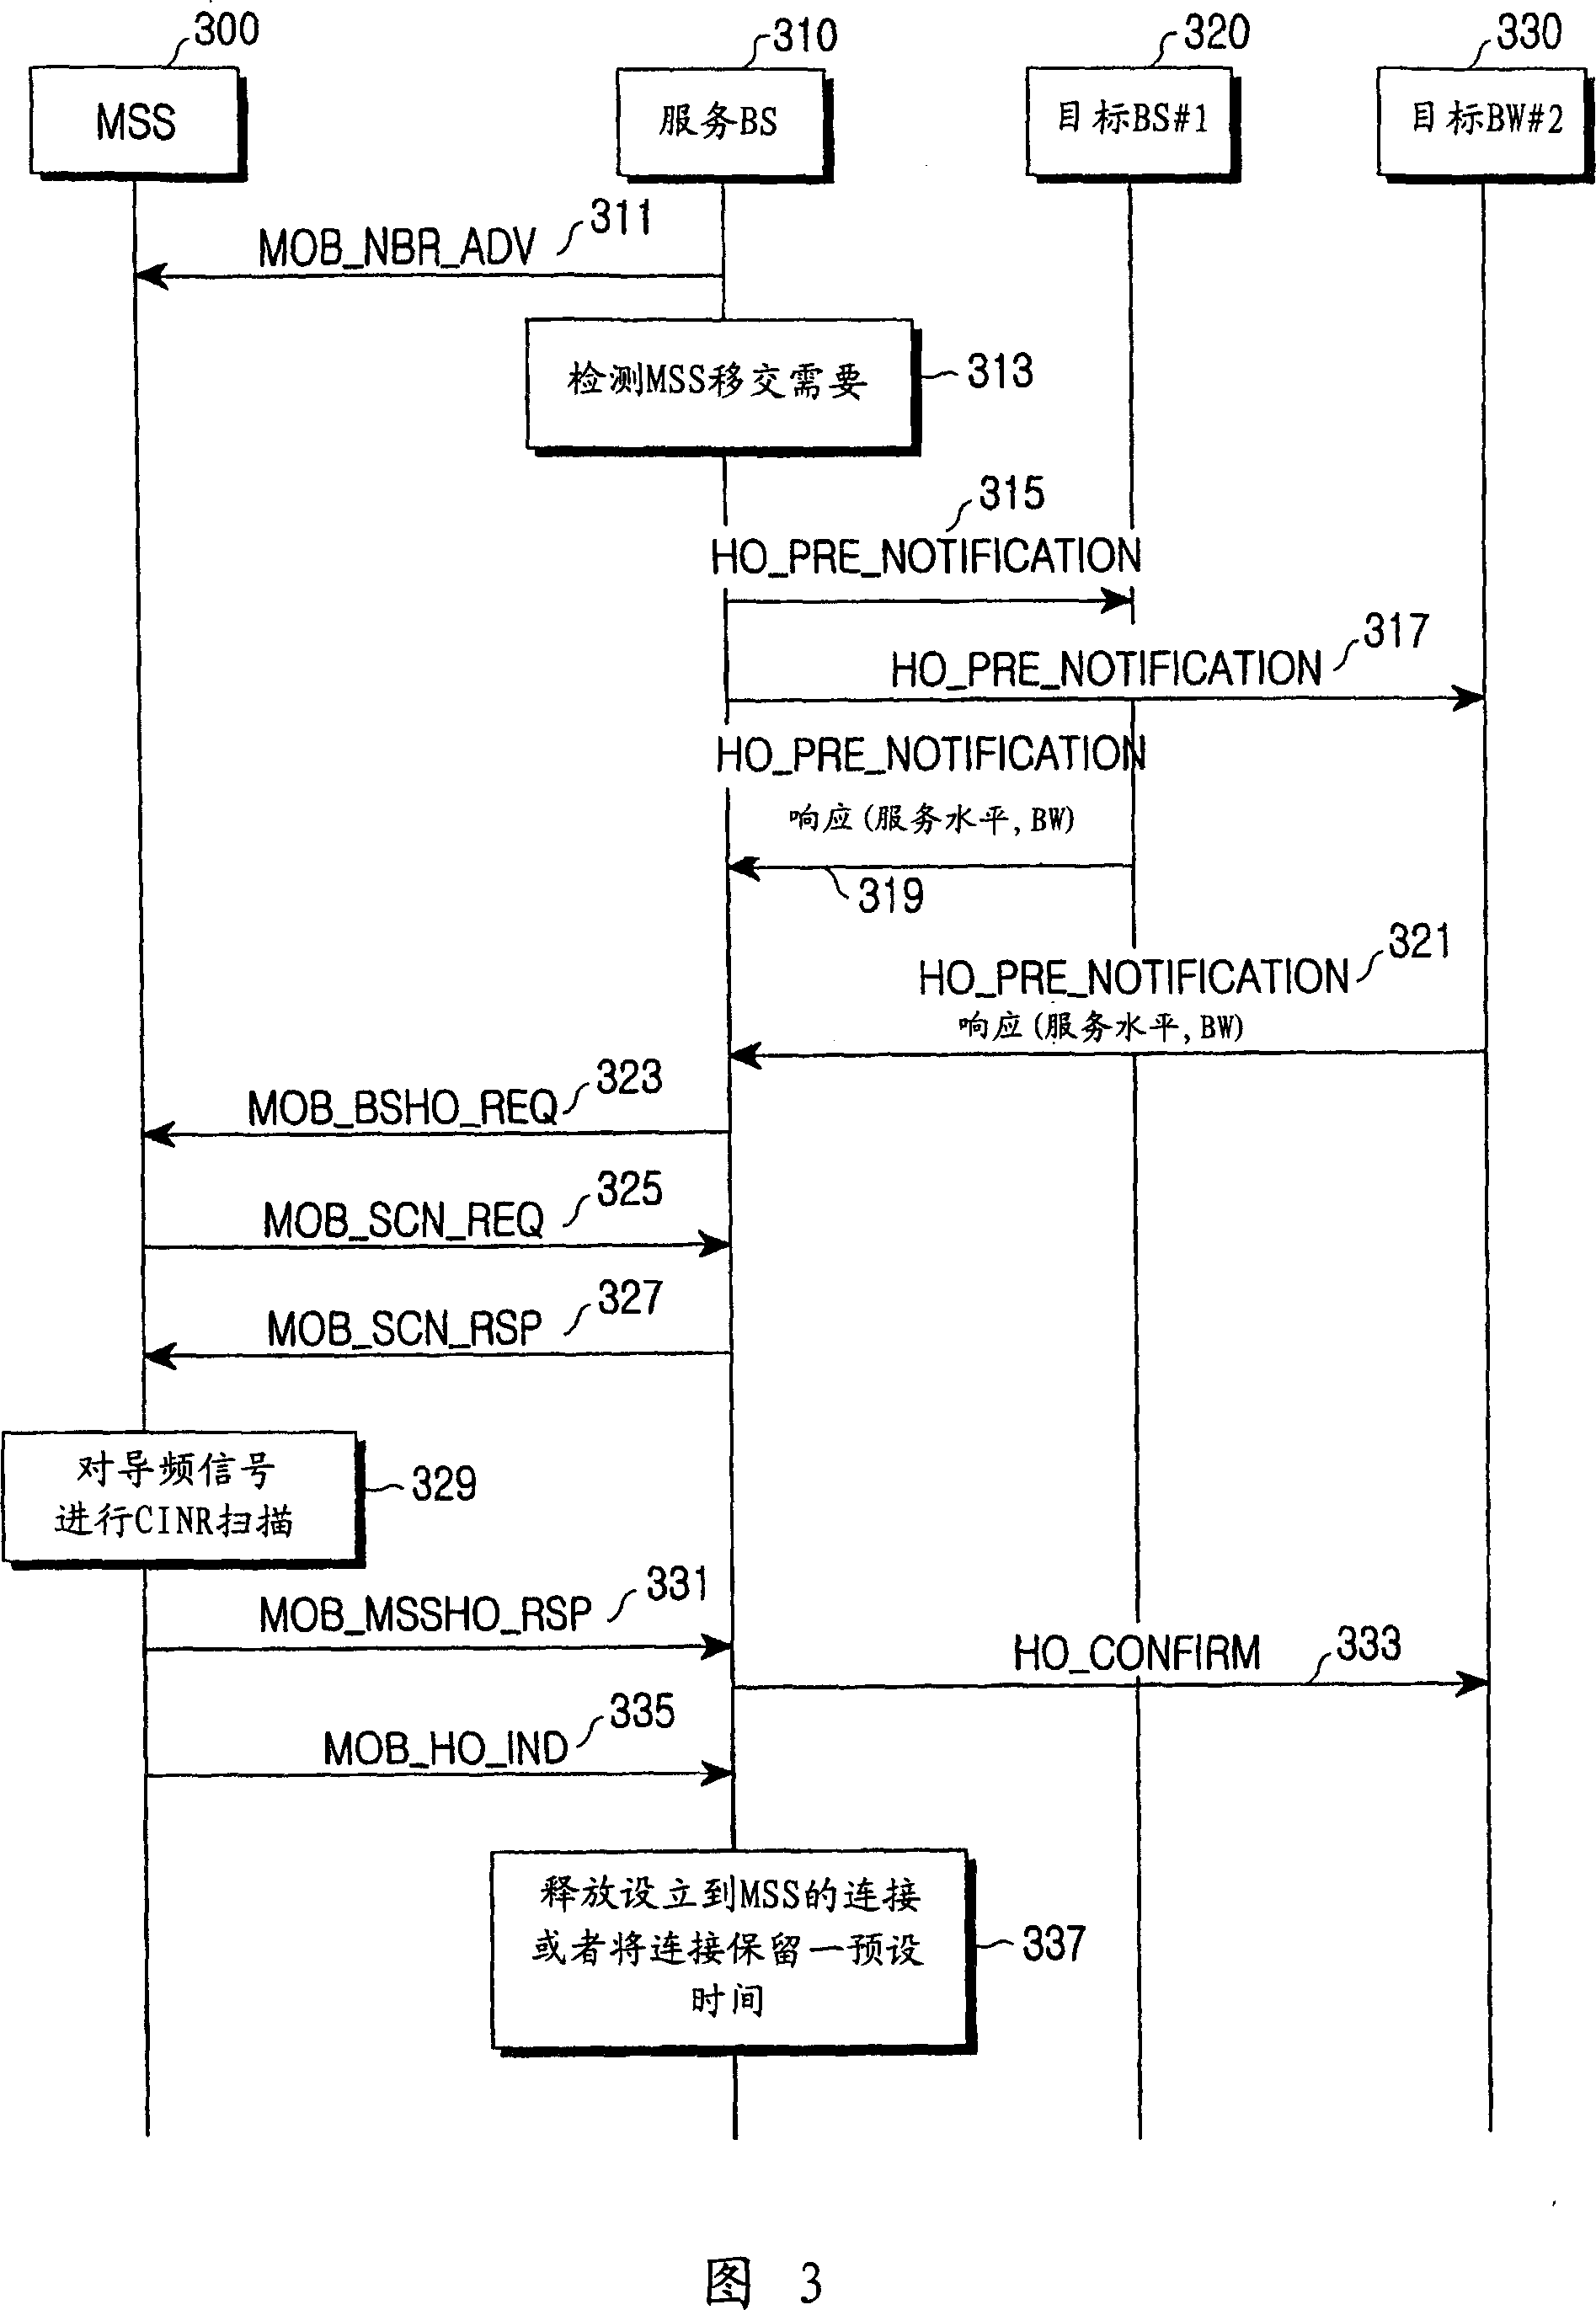 System and method for performing a fast handover in a wireless communication system